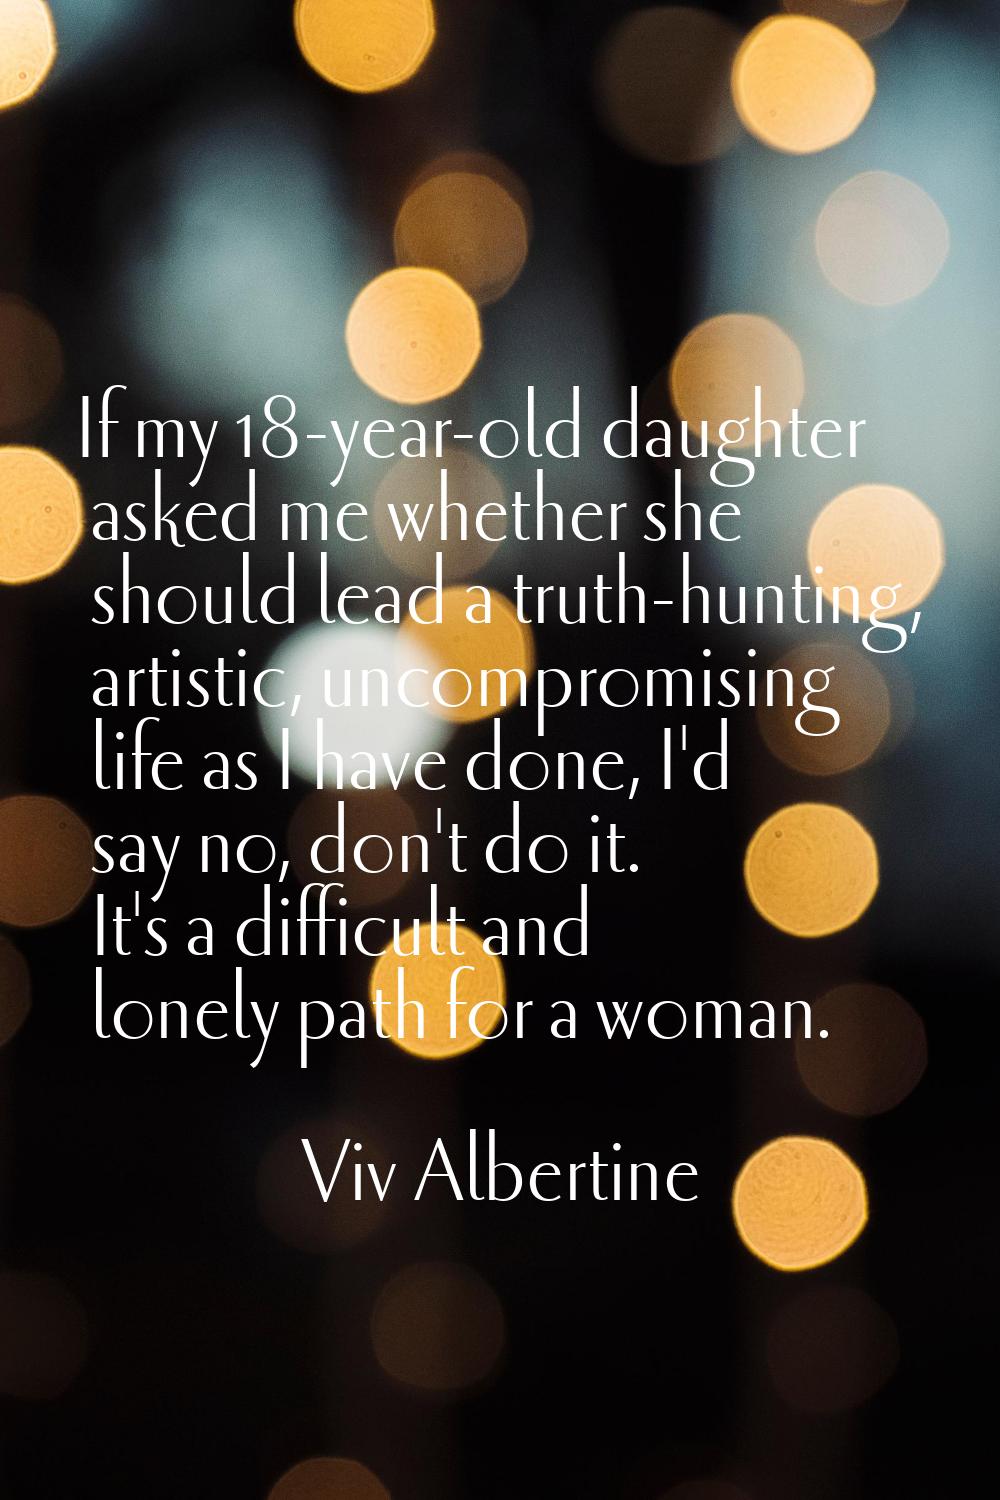 If my 18-year-old daughter asked me whether she should lead a truth-hunting, artistic, uncompromisi